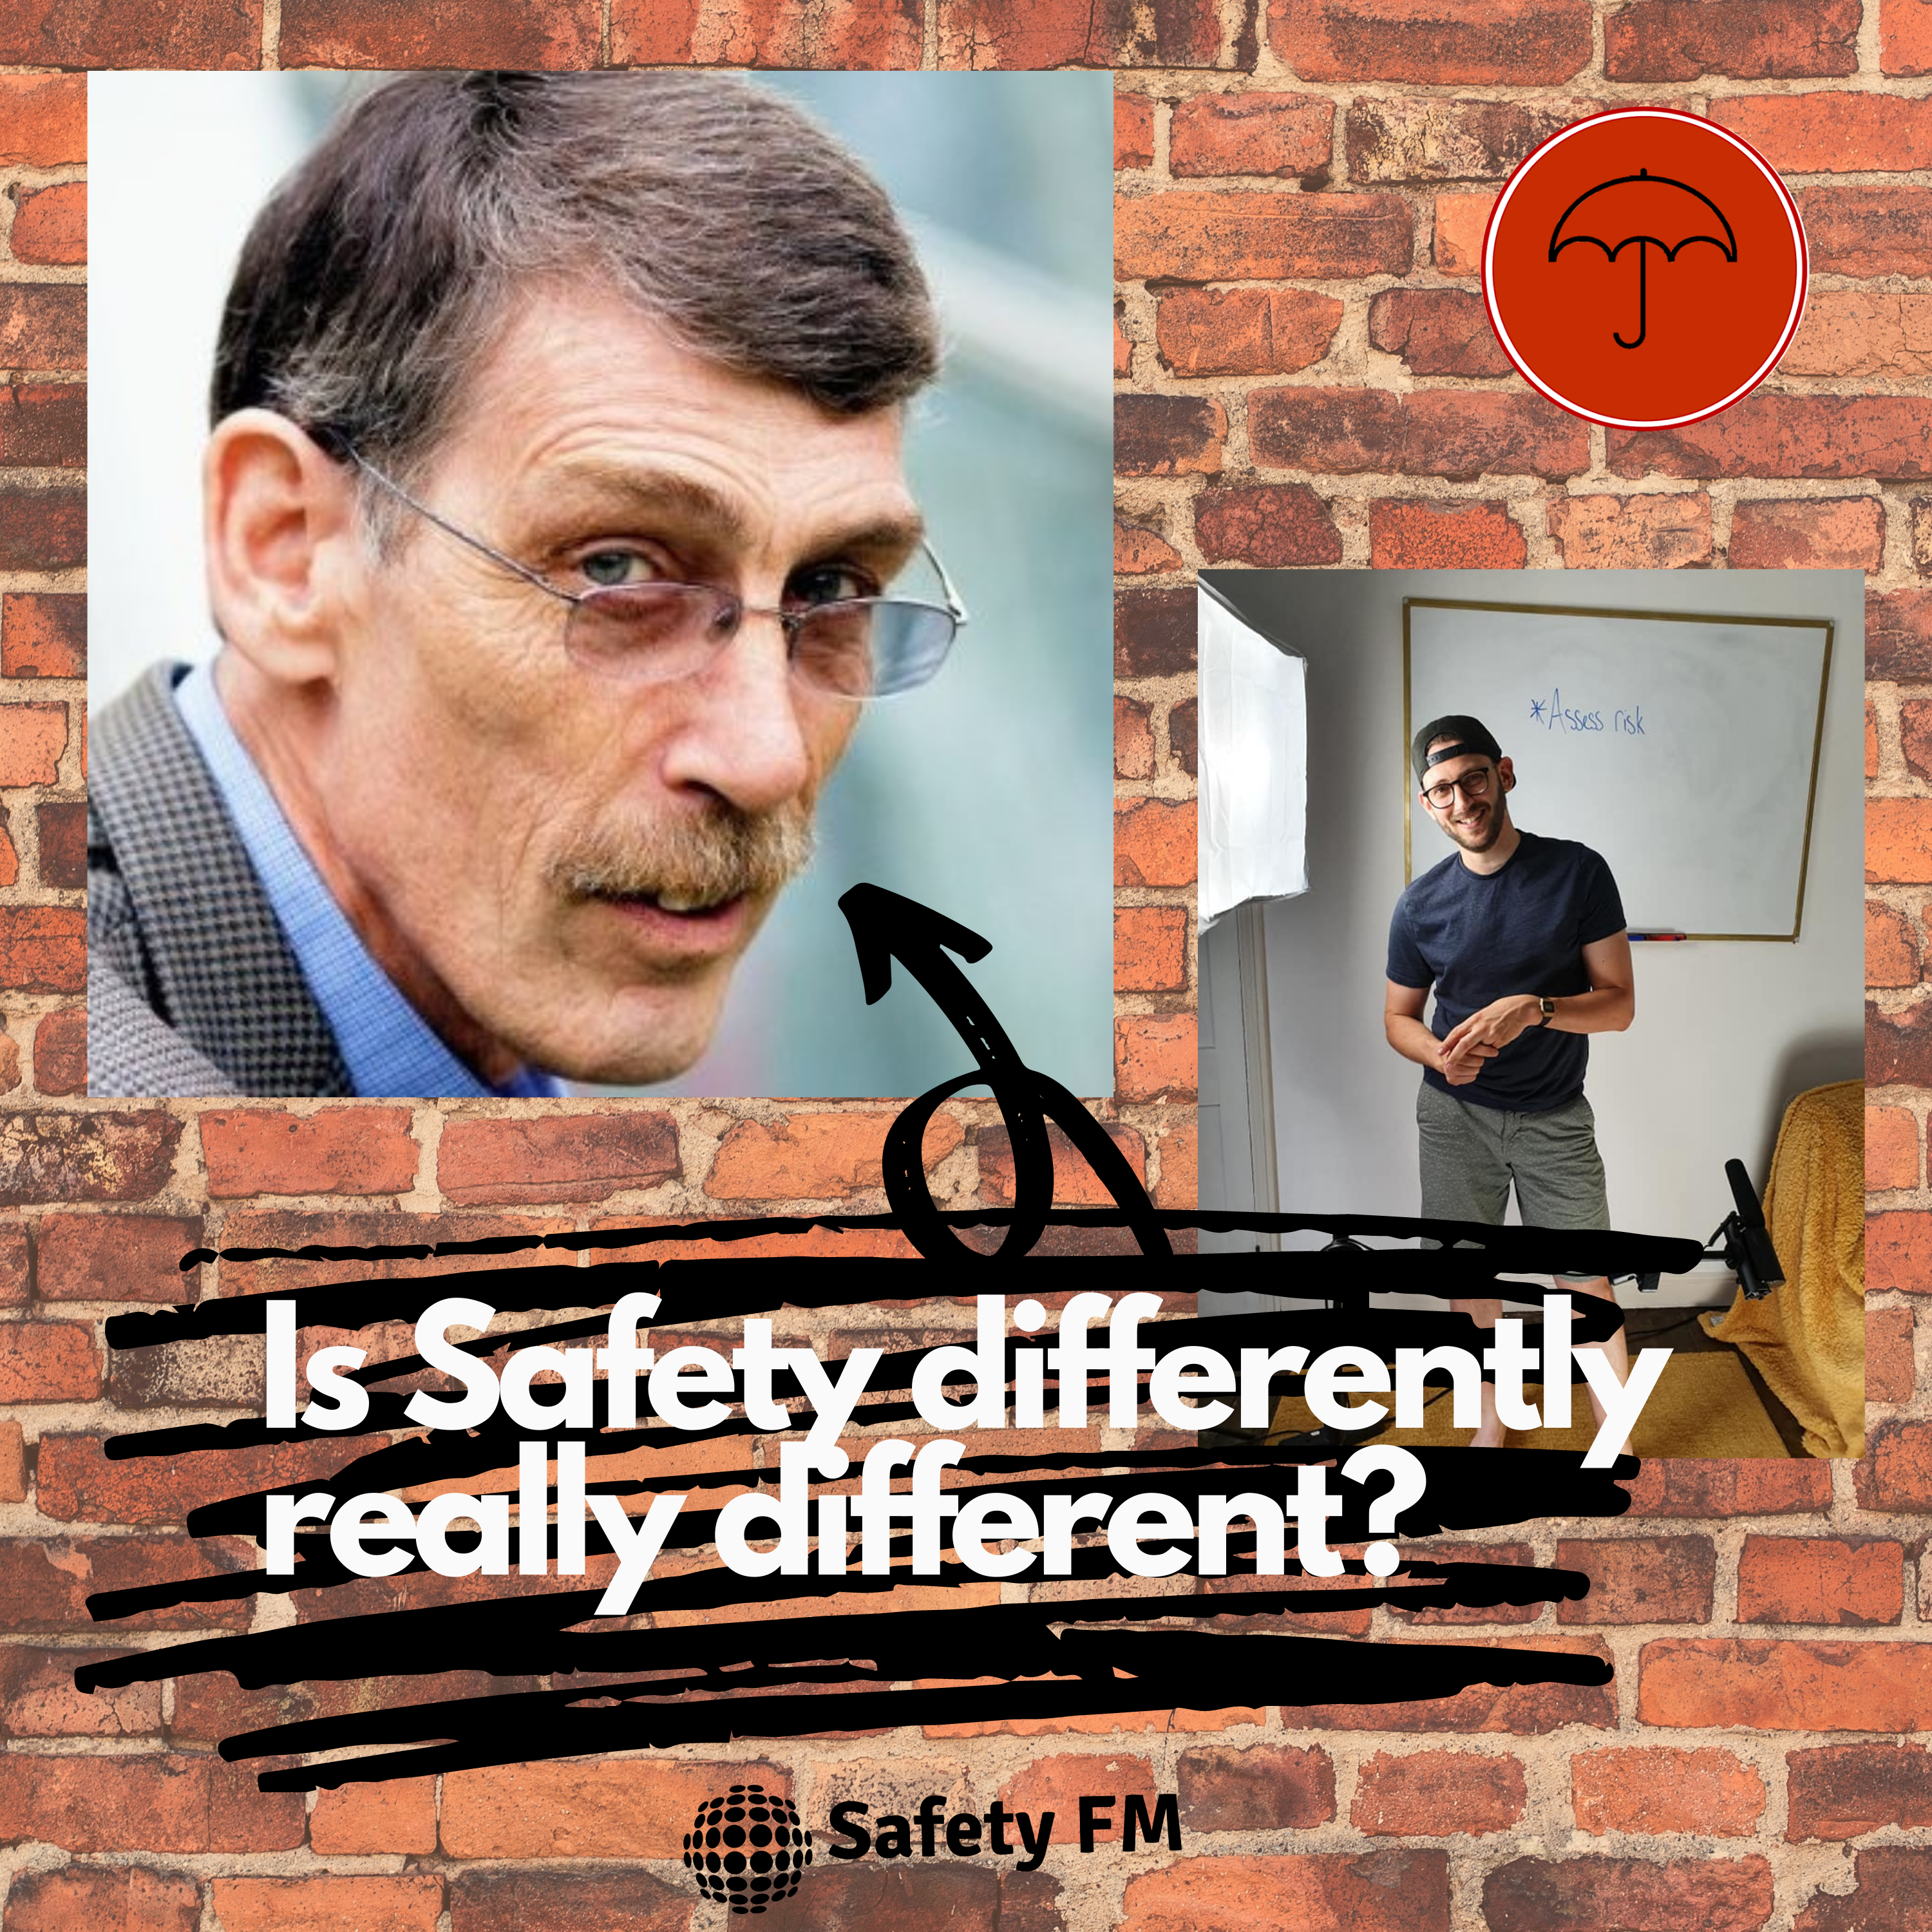 How Different is Safety Differently